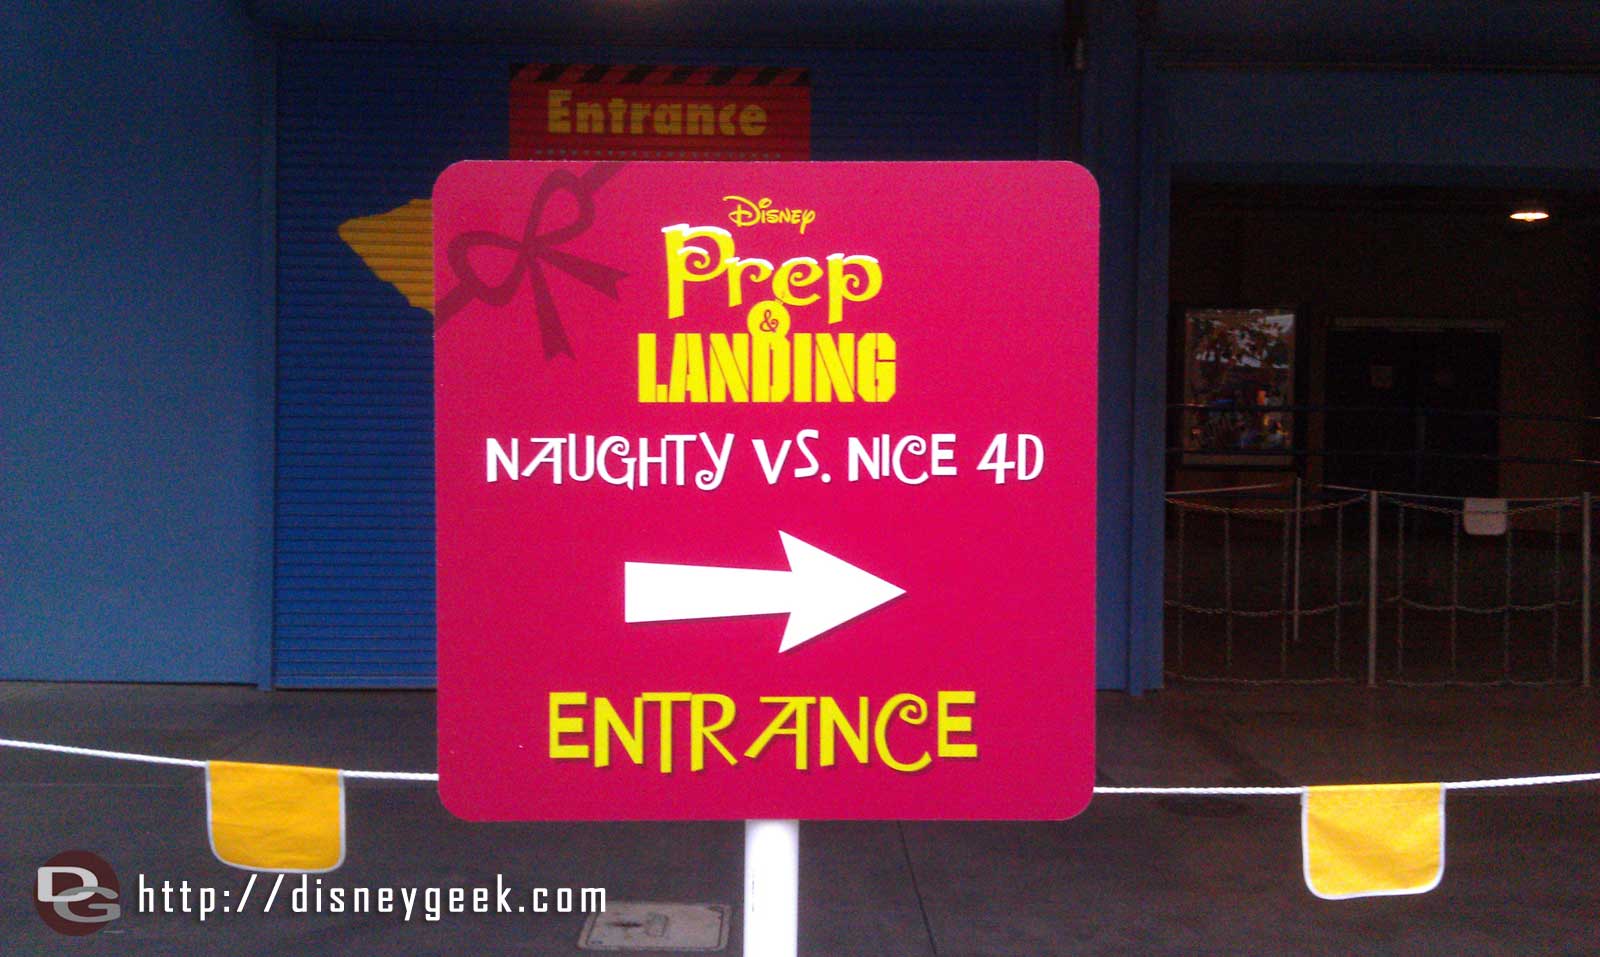 Prep Landing Naughty vs Nice 4D is now playing in the Muppet theater.